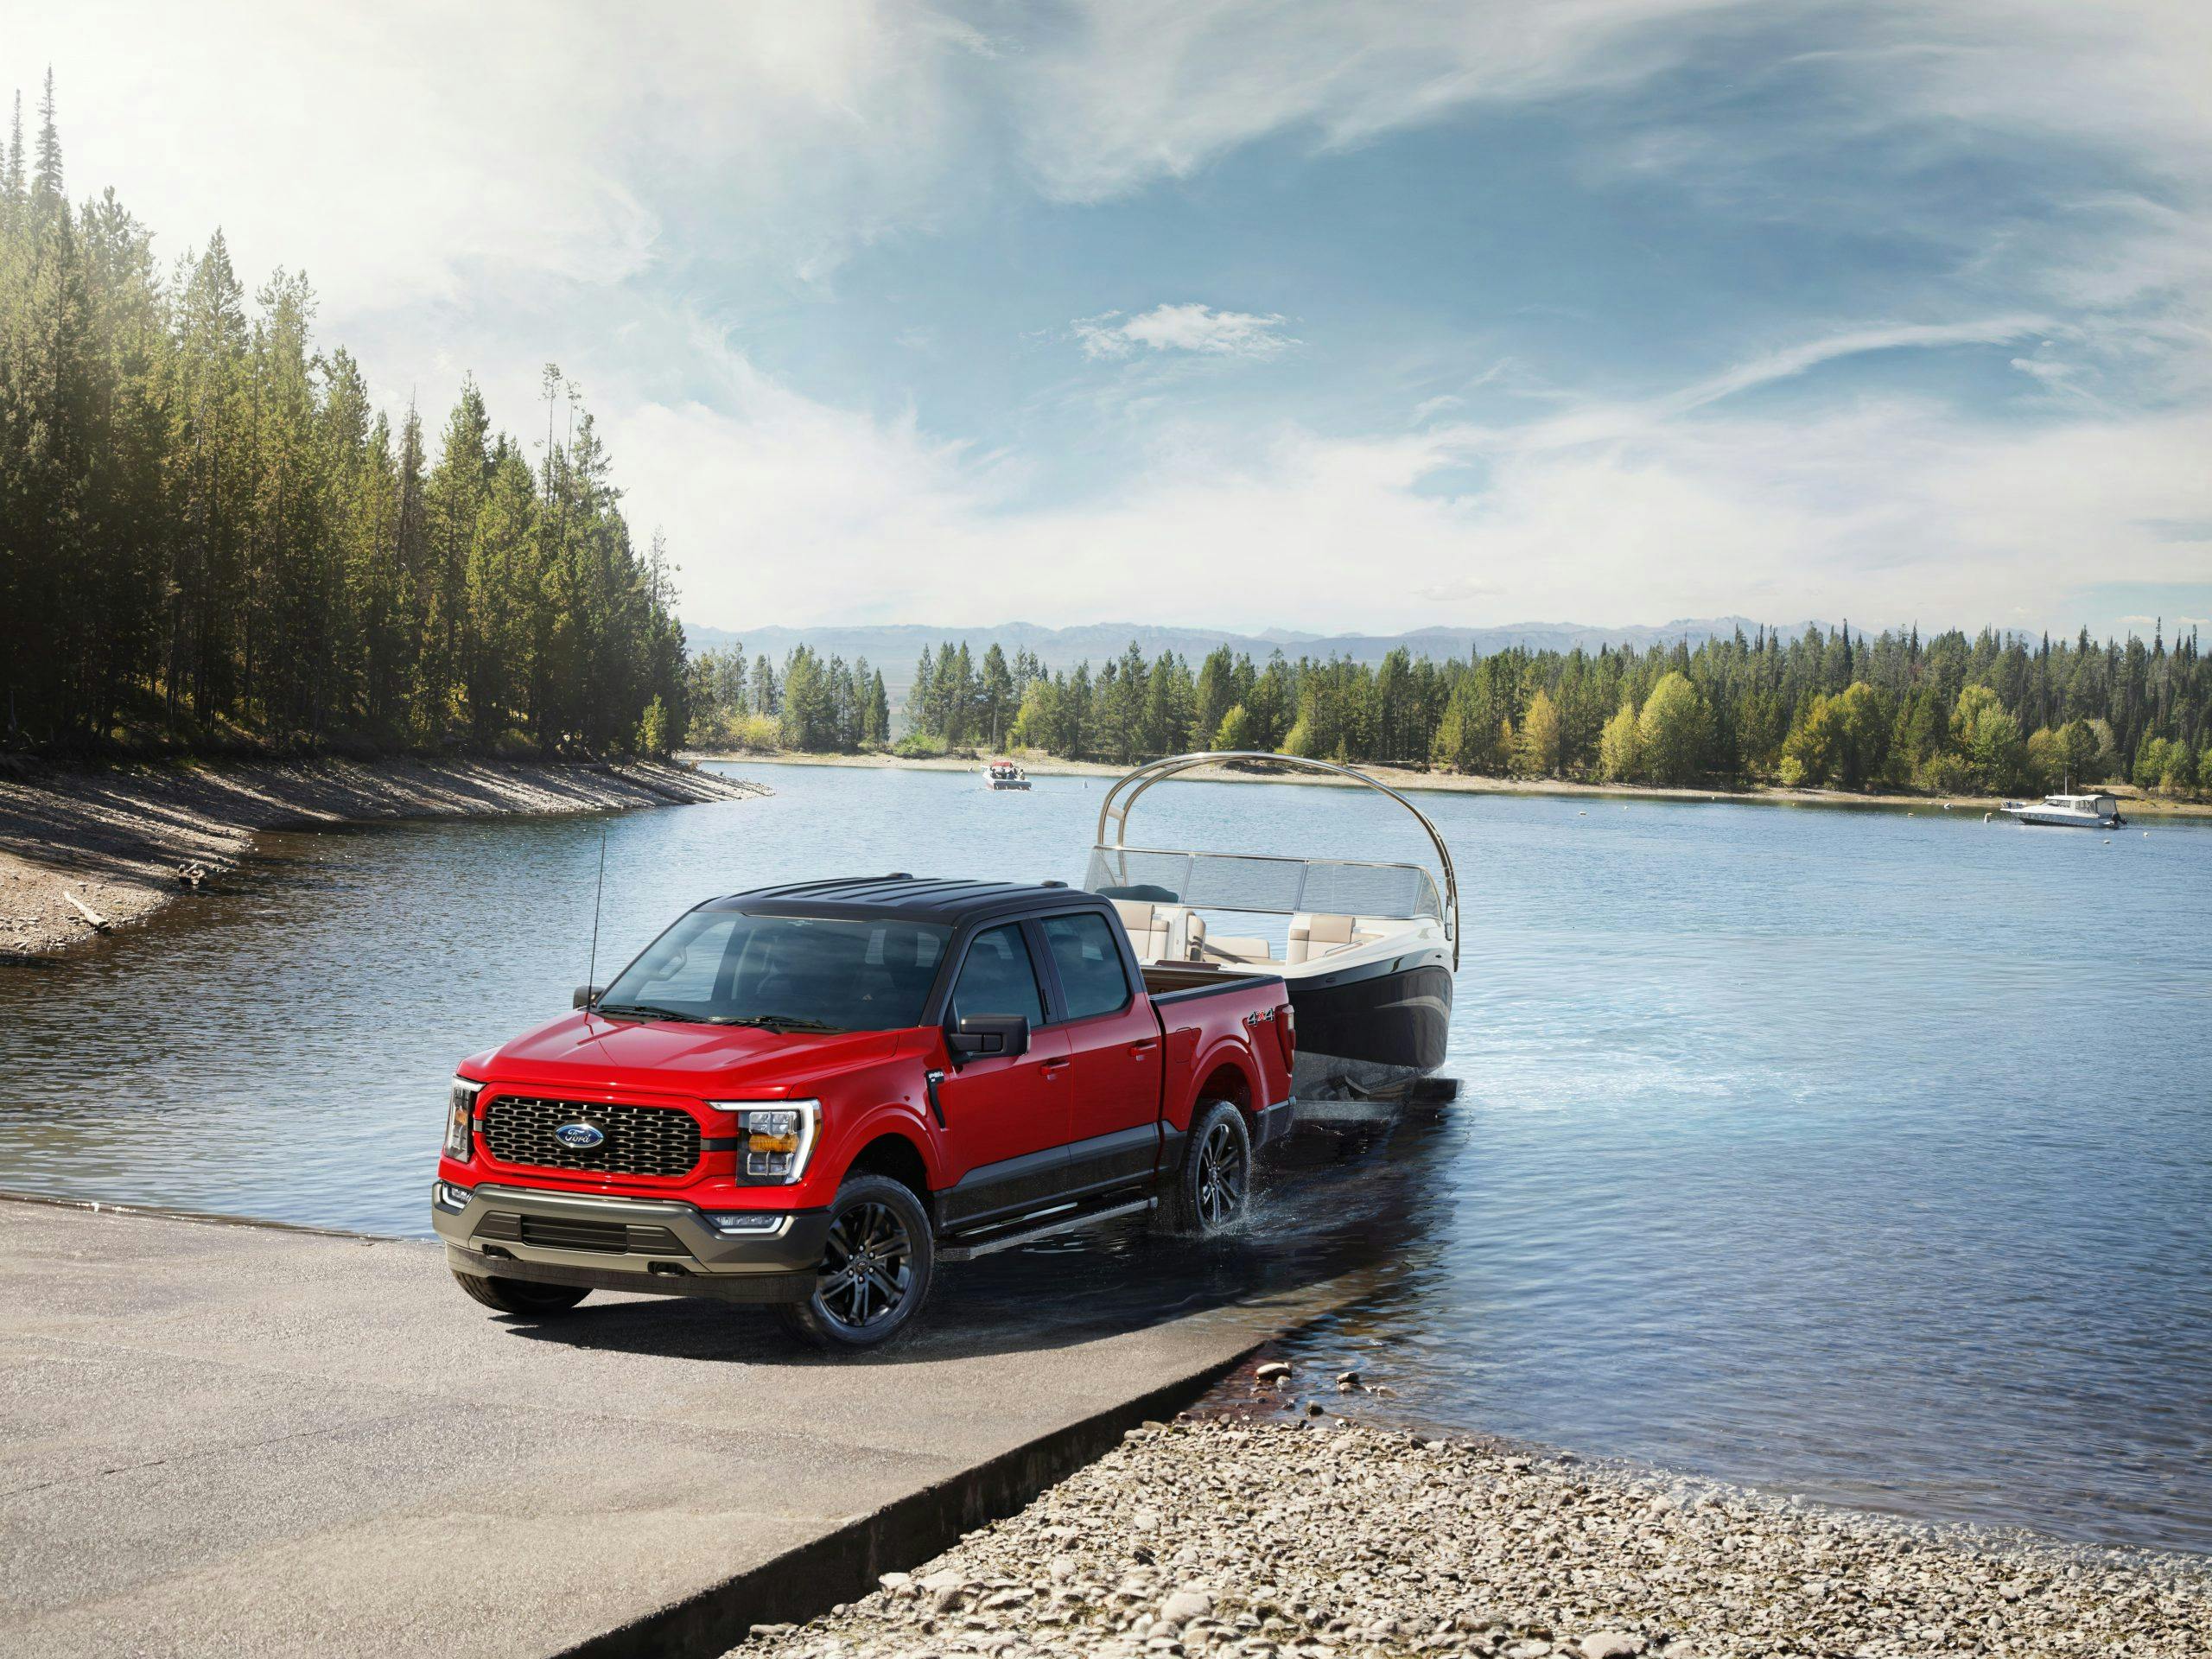 2023 F-150 Heritage Edition exterior red towing boat